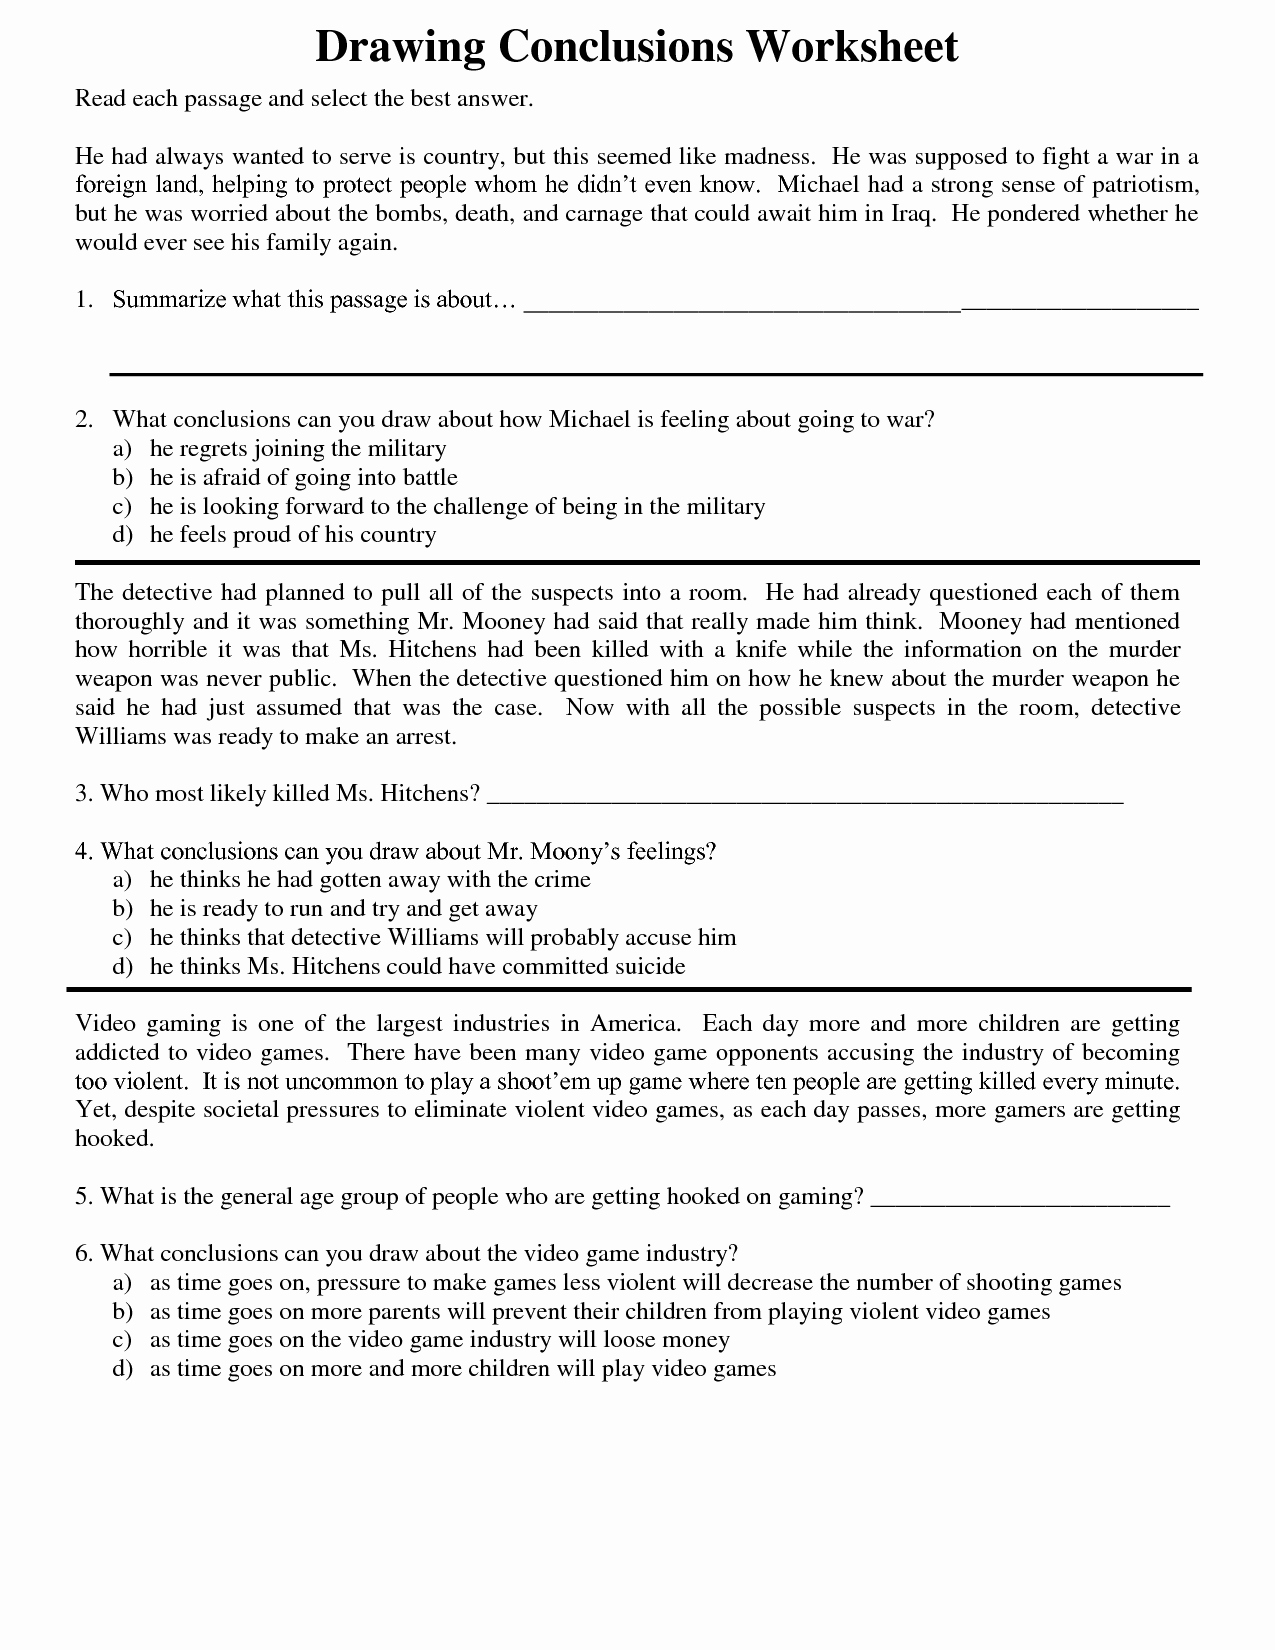 Drawing Conclusions Worksheets 4th Grade Inspirational Drawing Conclusions Worksheets for 4th Graders 1000